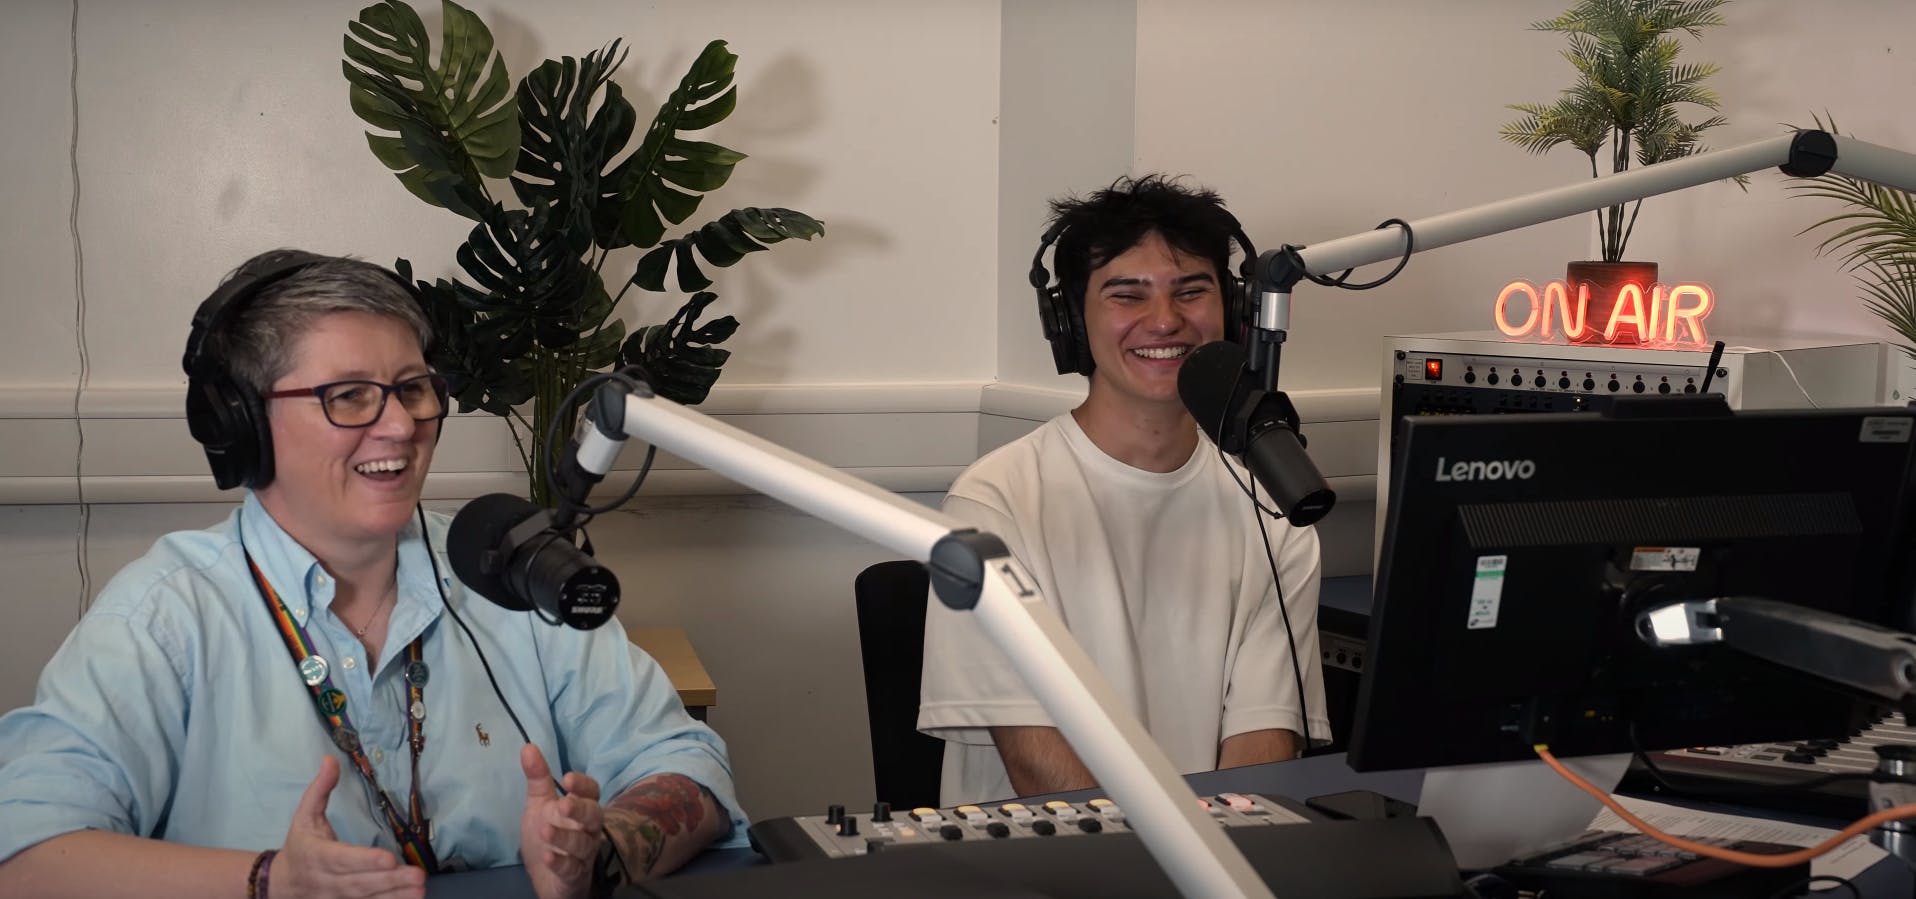 Student support advisor Lou and student Ethan host a podcast about Mental Health. They both have headphones on and are sat in front of microphones. 